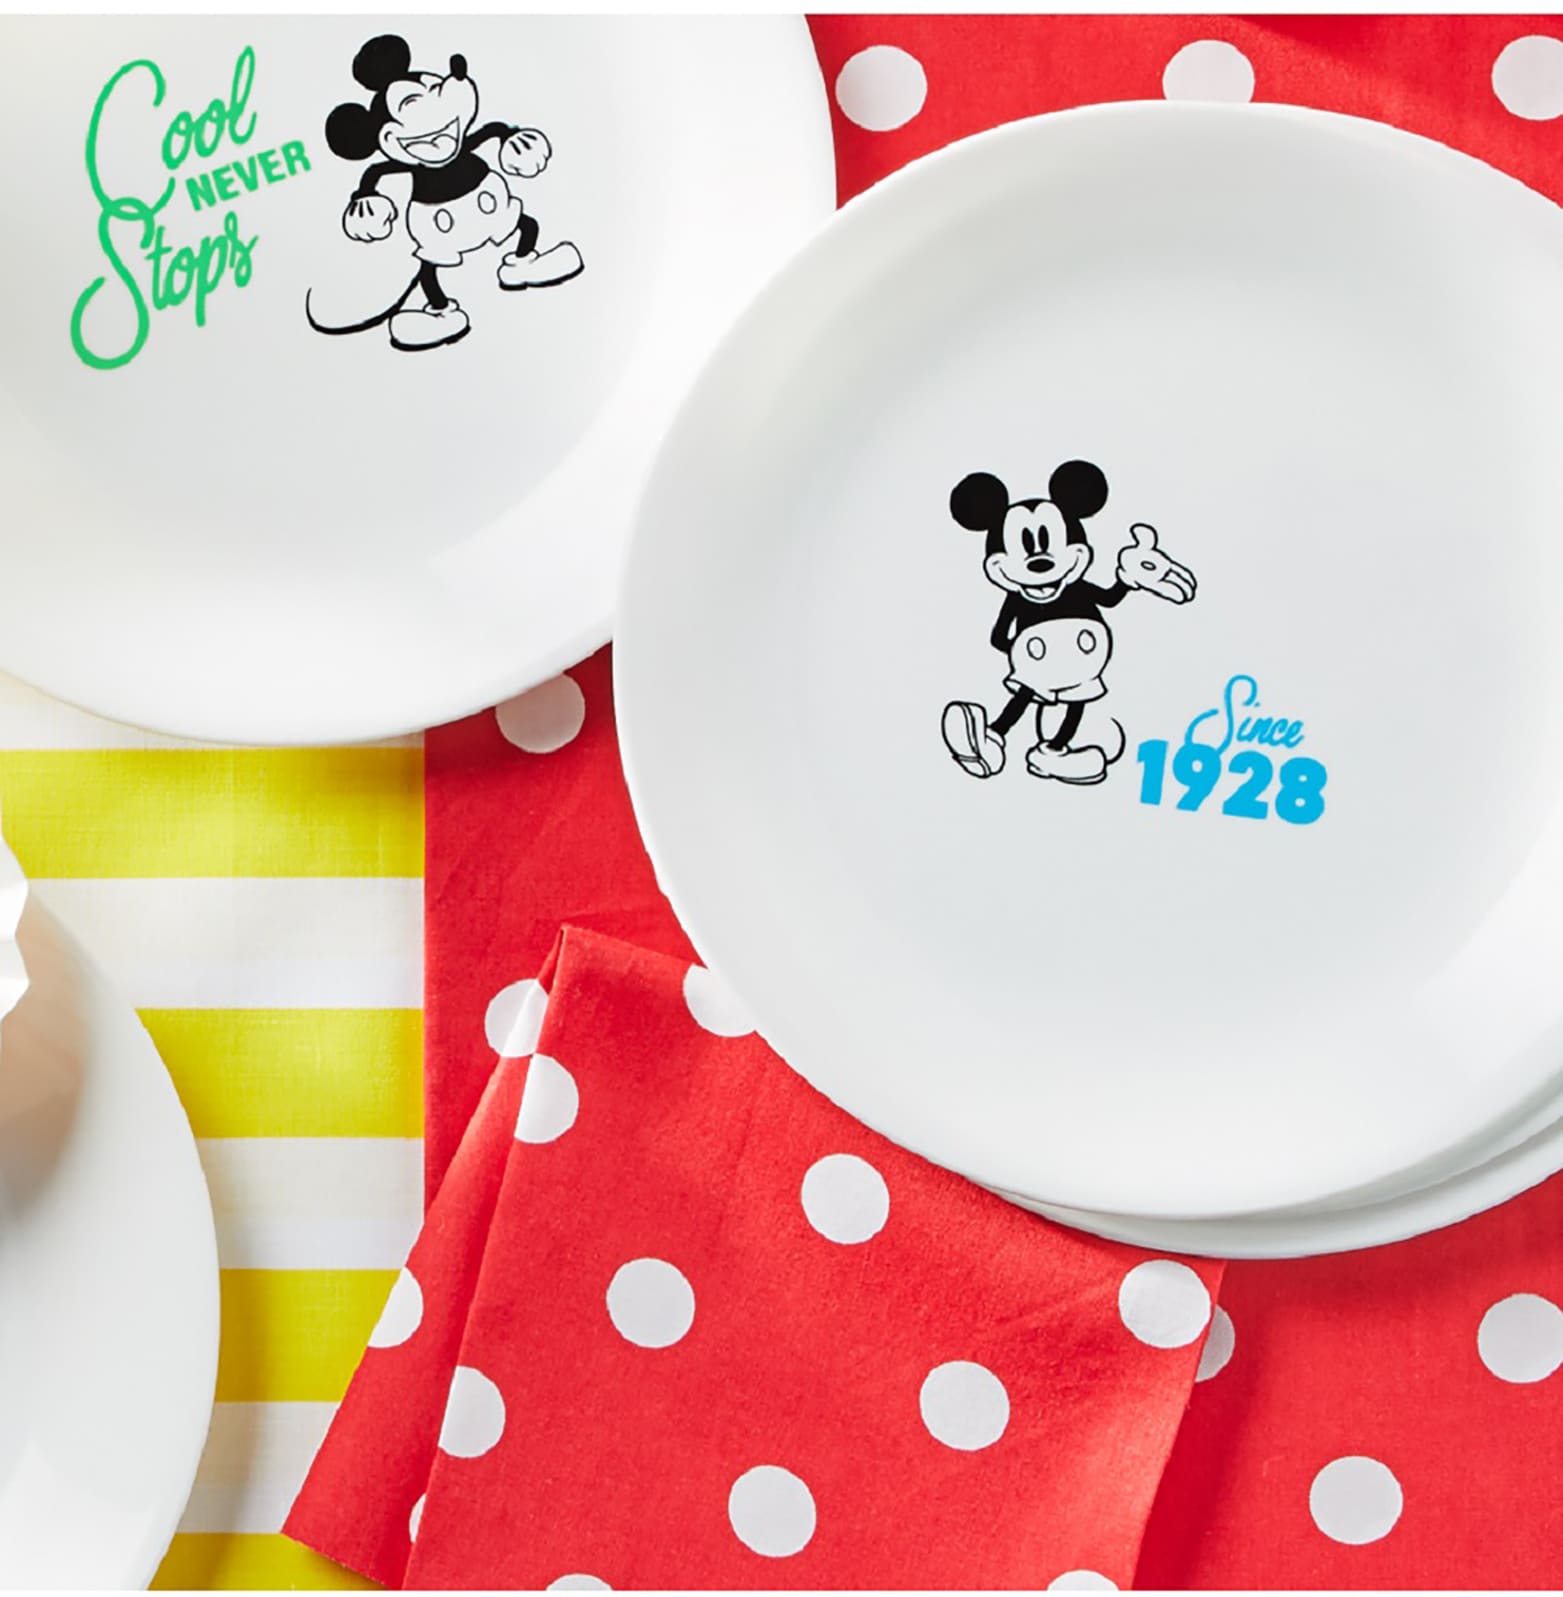 Corelle Disney Mickey Mouse Lunch Plates 4pk - Chip Resistant